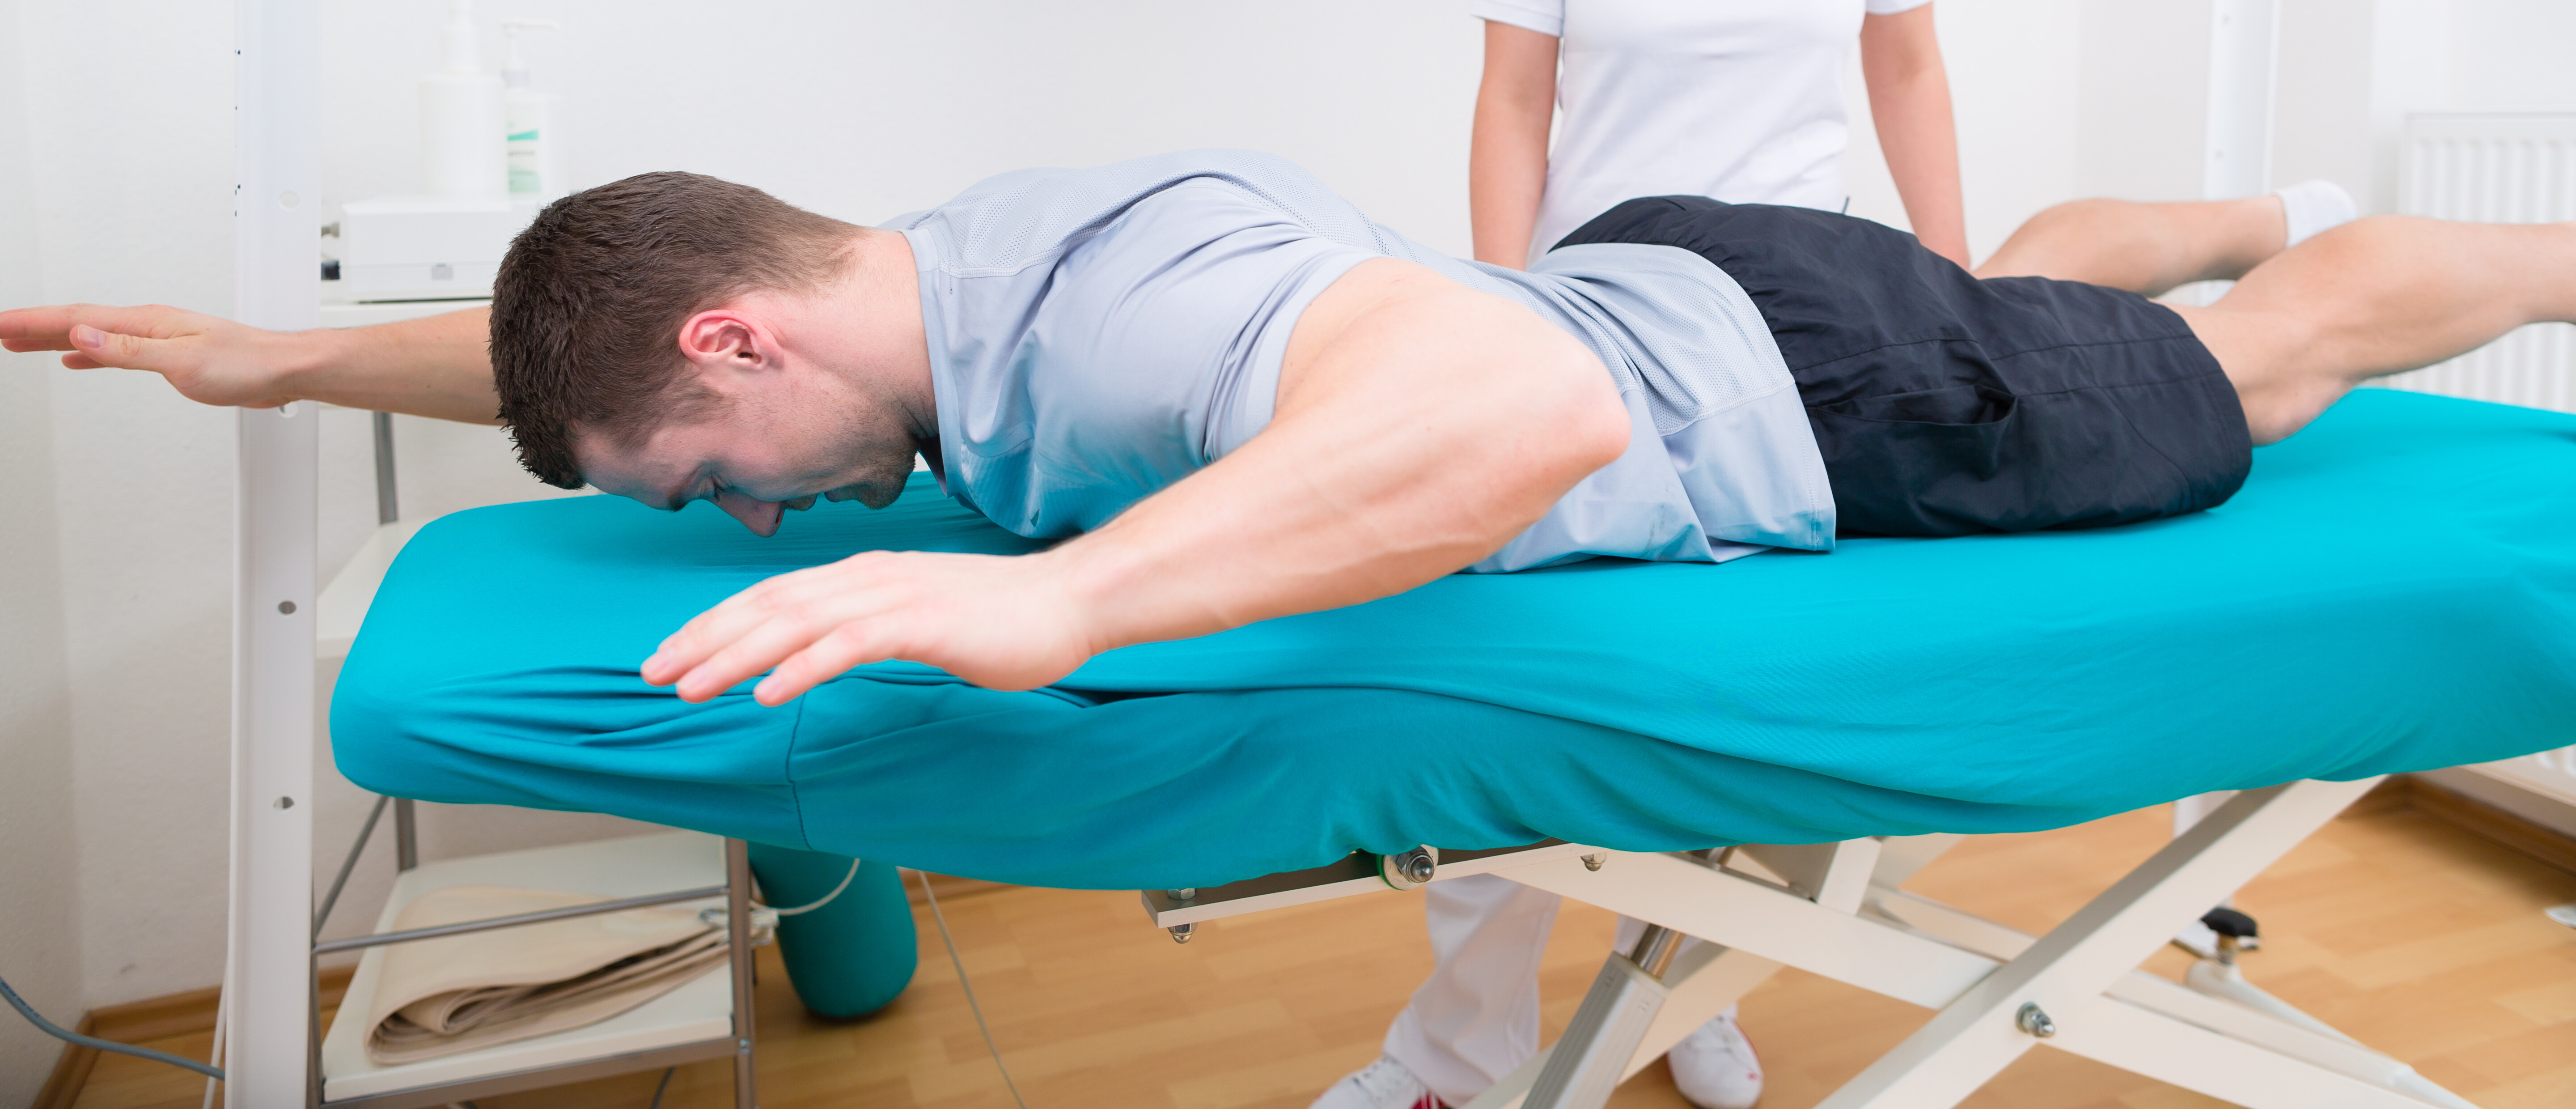 Man lying face down on a treatment table doing physical therapy exercises